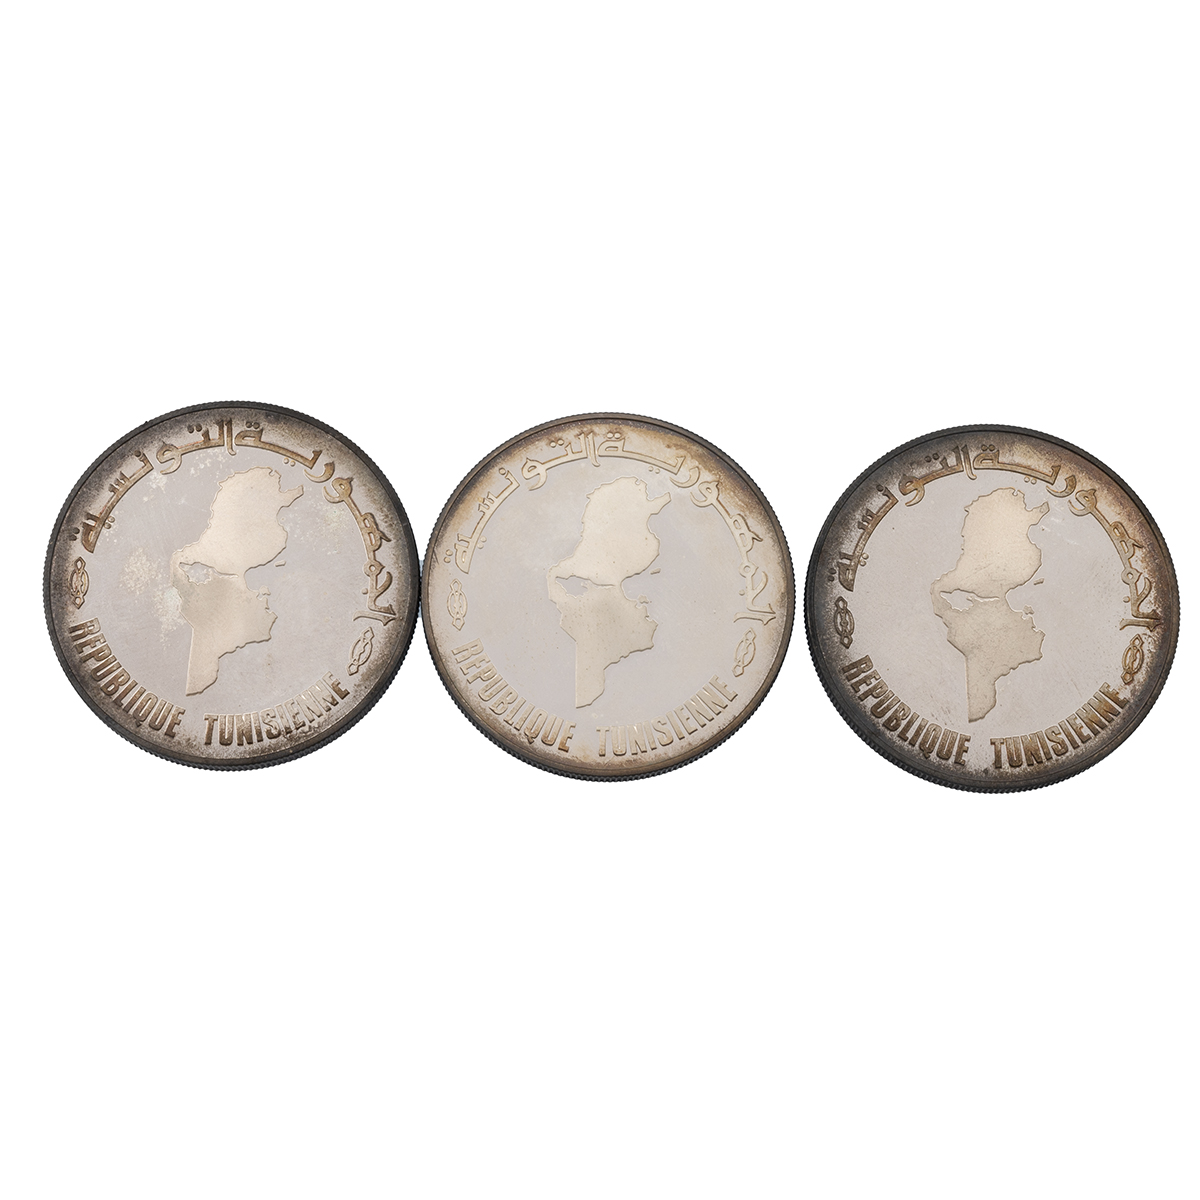 1958-1988 silver three-coin 10 Dinars set celebrating the 30th Anniversary of the Central Bank of... - Image 3 of 4